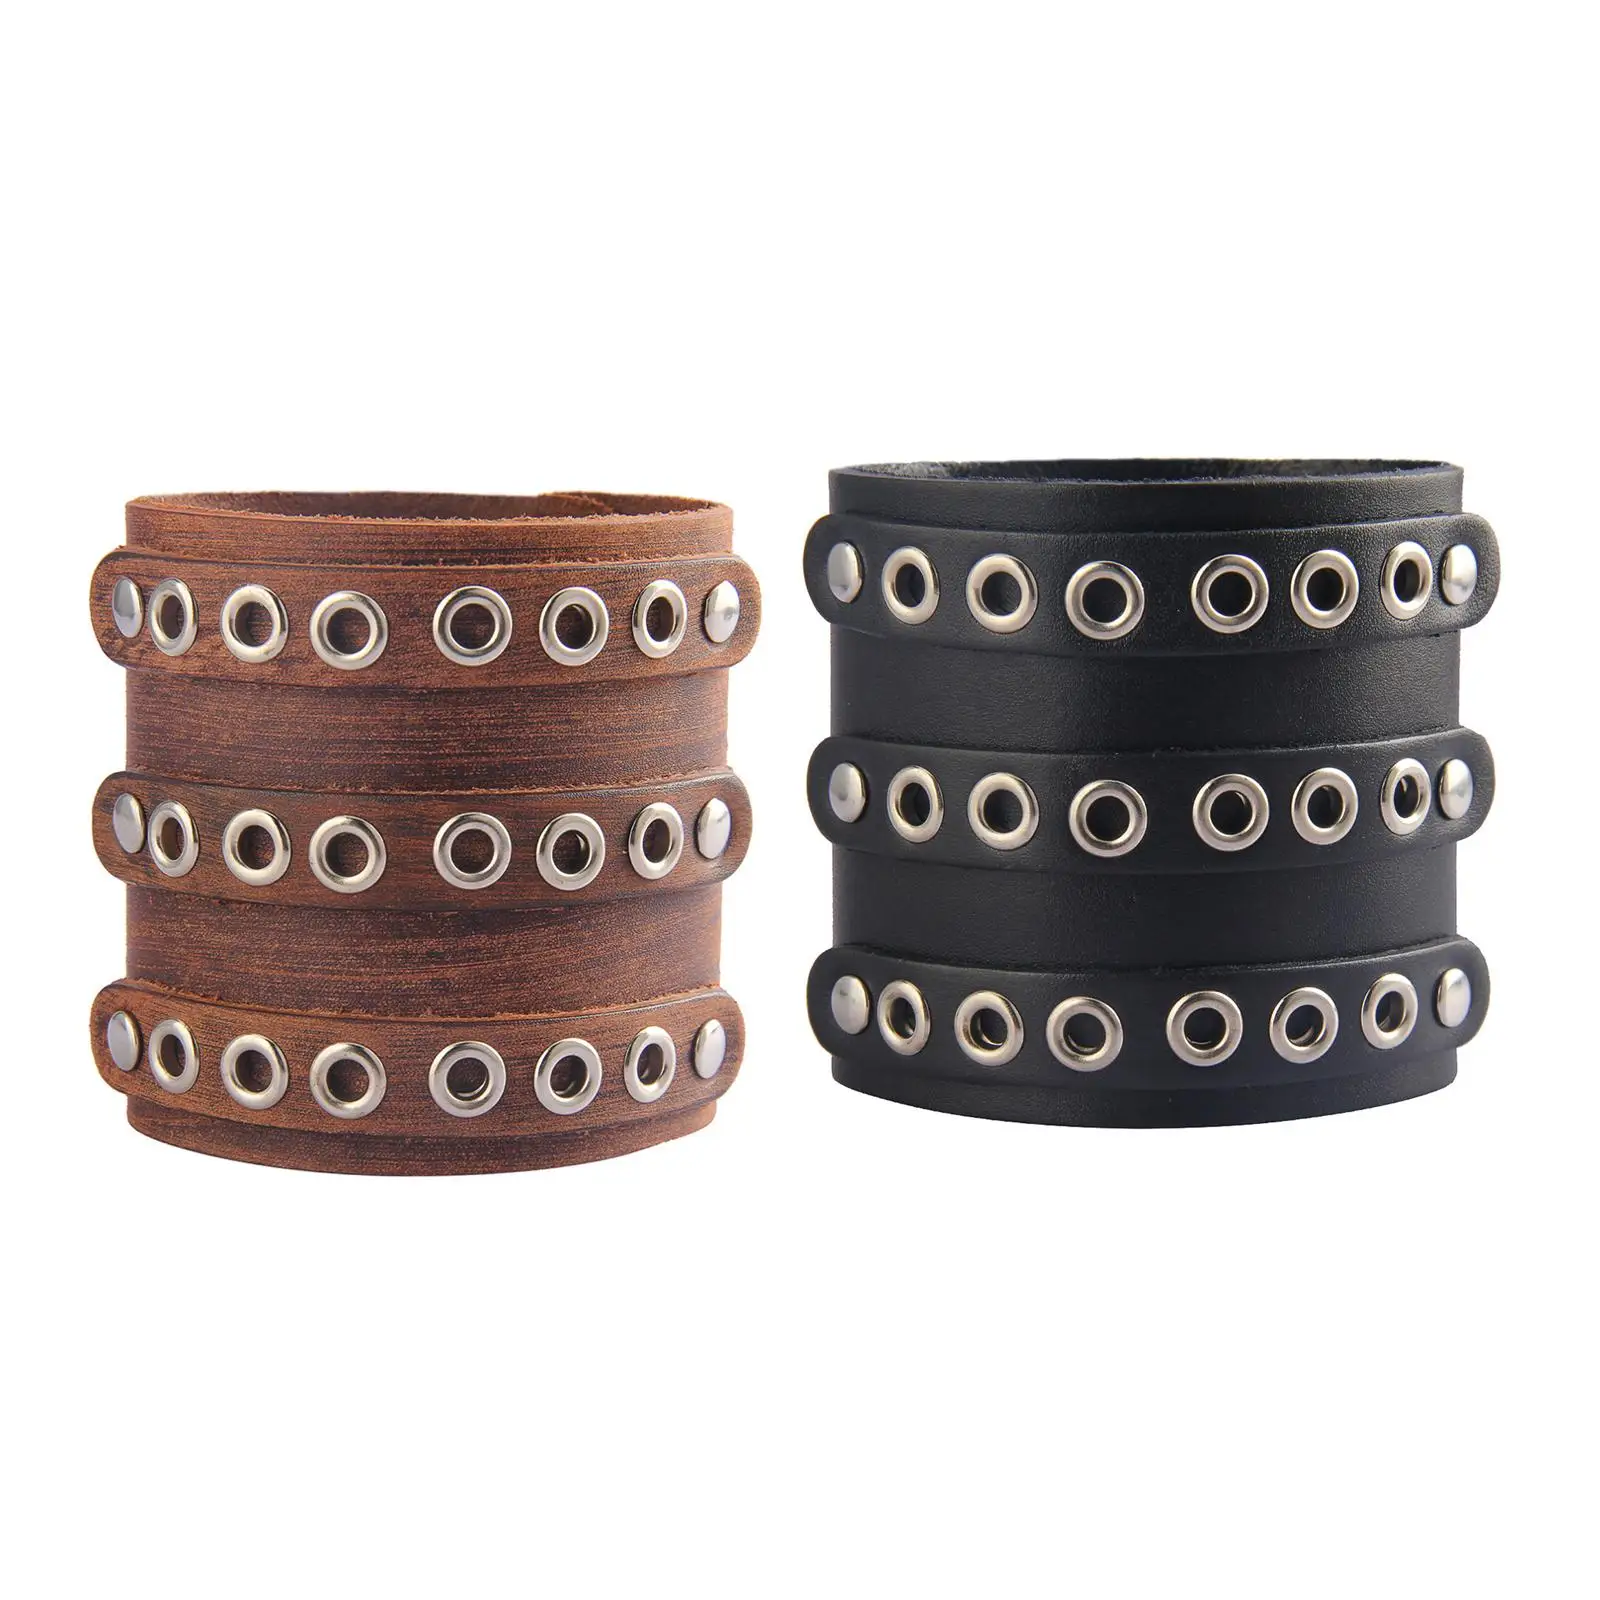 PU Leather Bracelet Vintage Fashion Three Rows of Holes Hip Hop Cuff Wrap Bracelet for Birthday Party Husband Men Women Brother